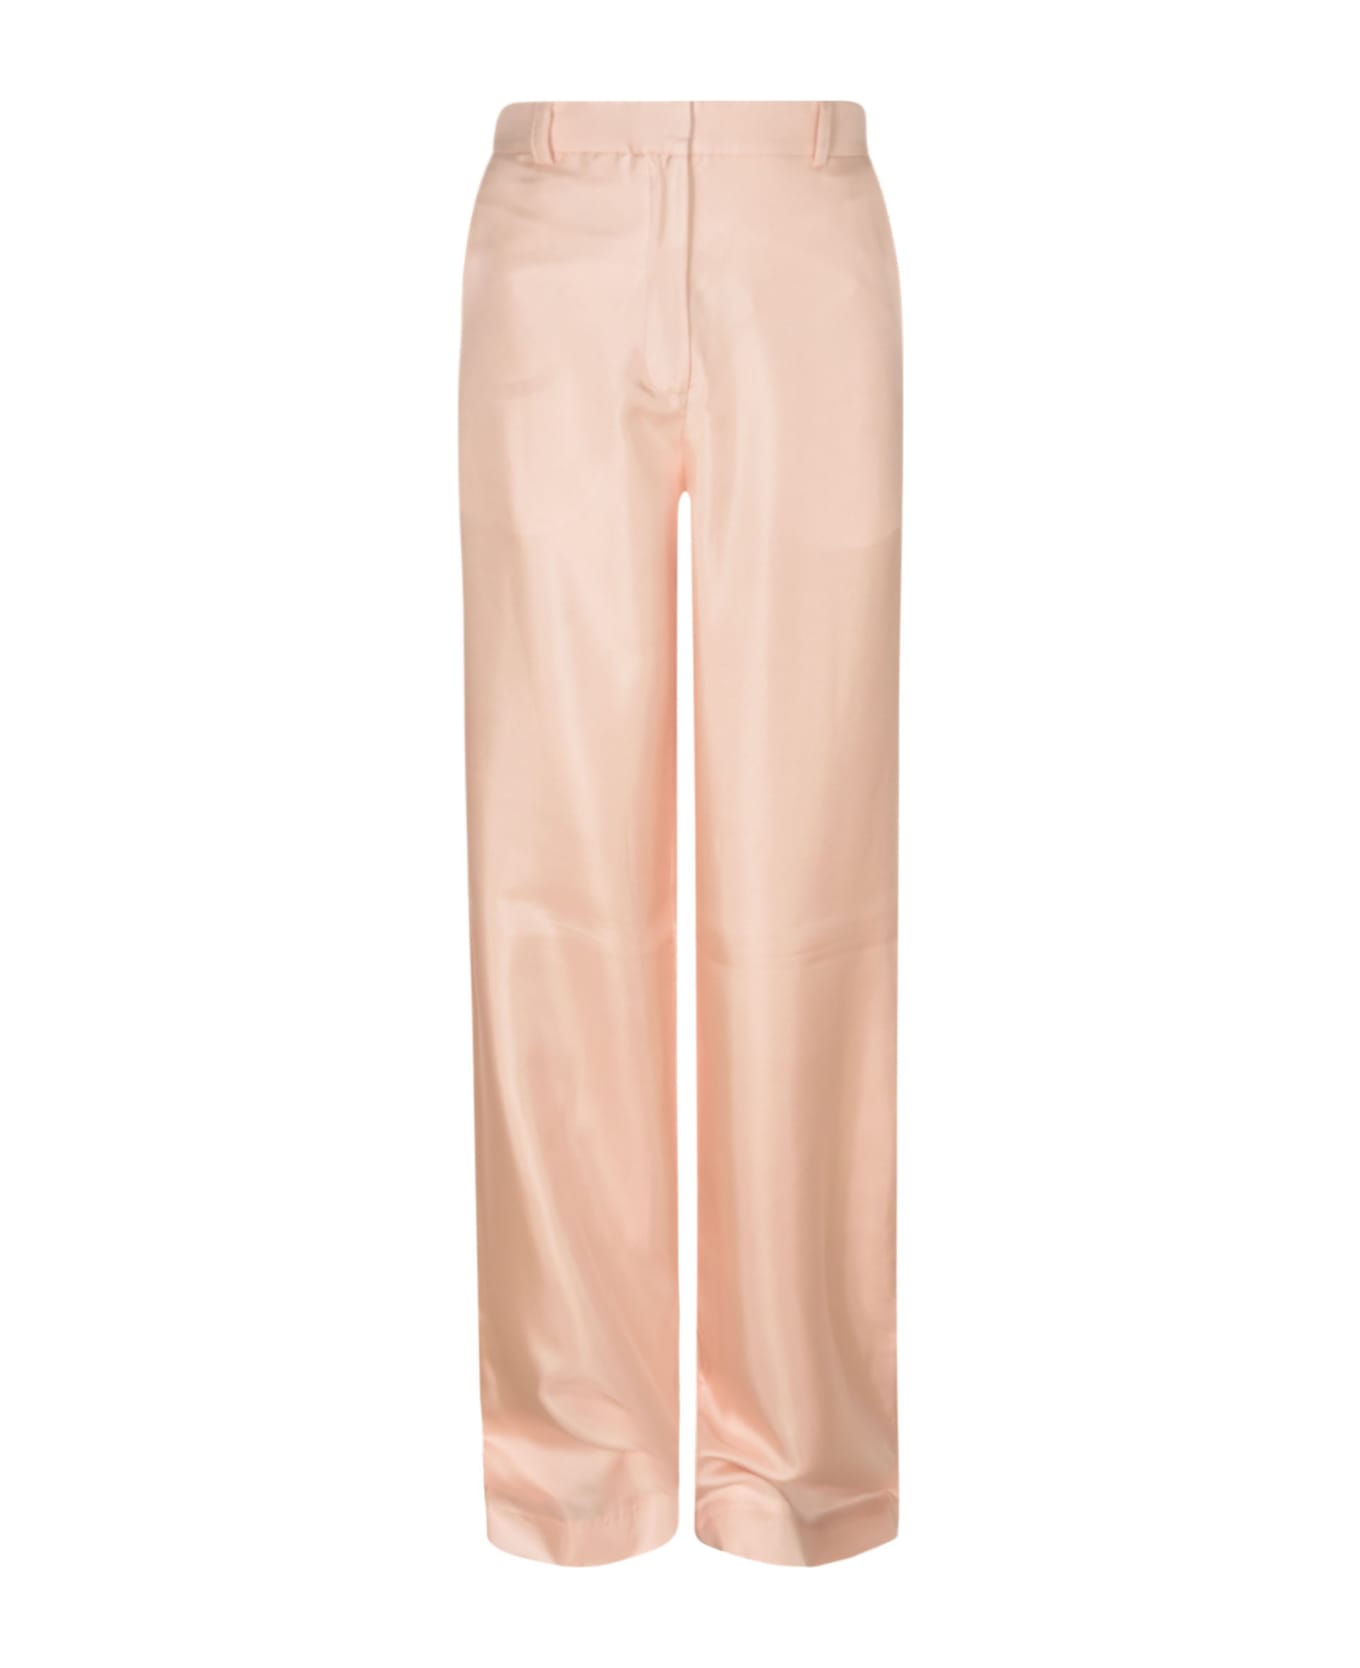 Lanvin High Waist Long Trousers - Pink ボトムス